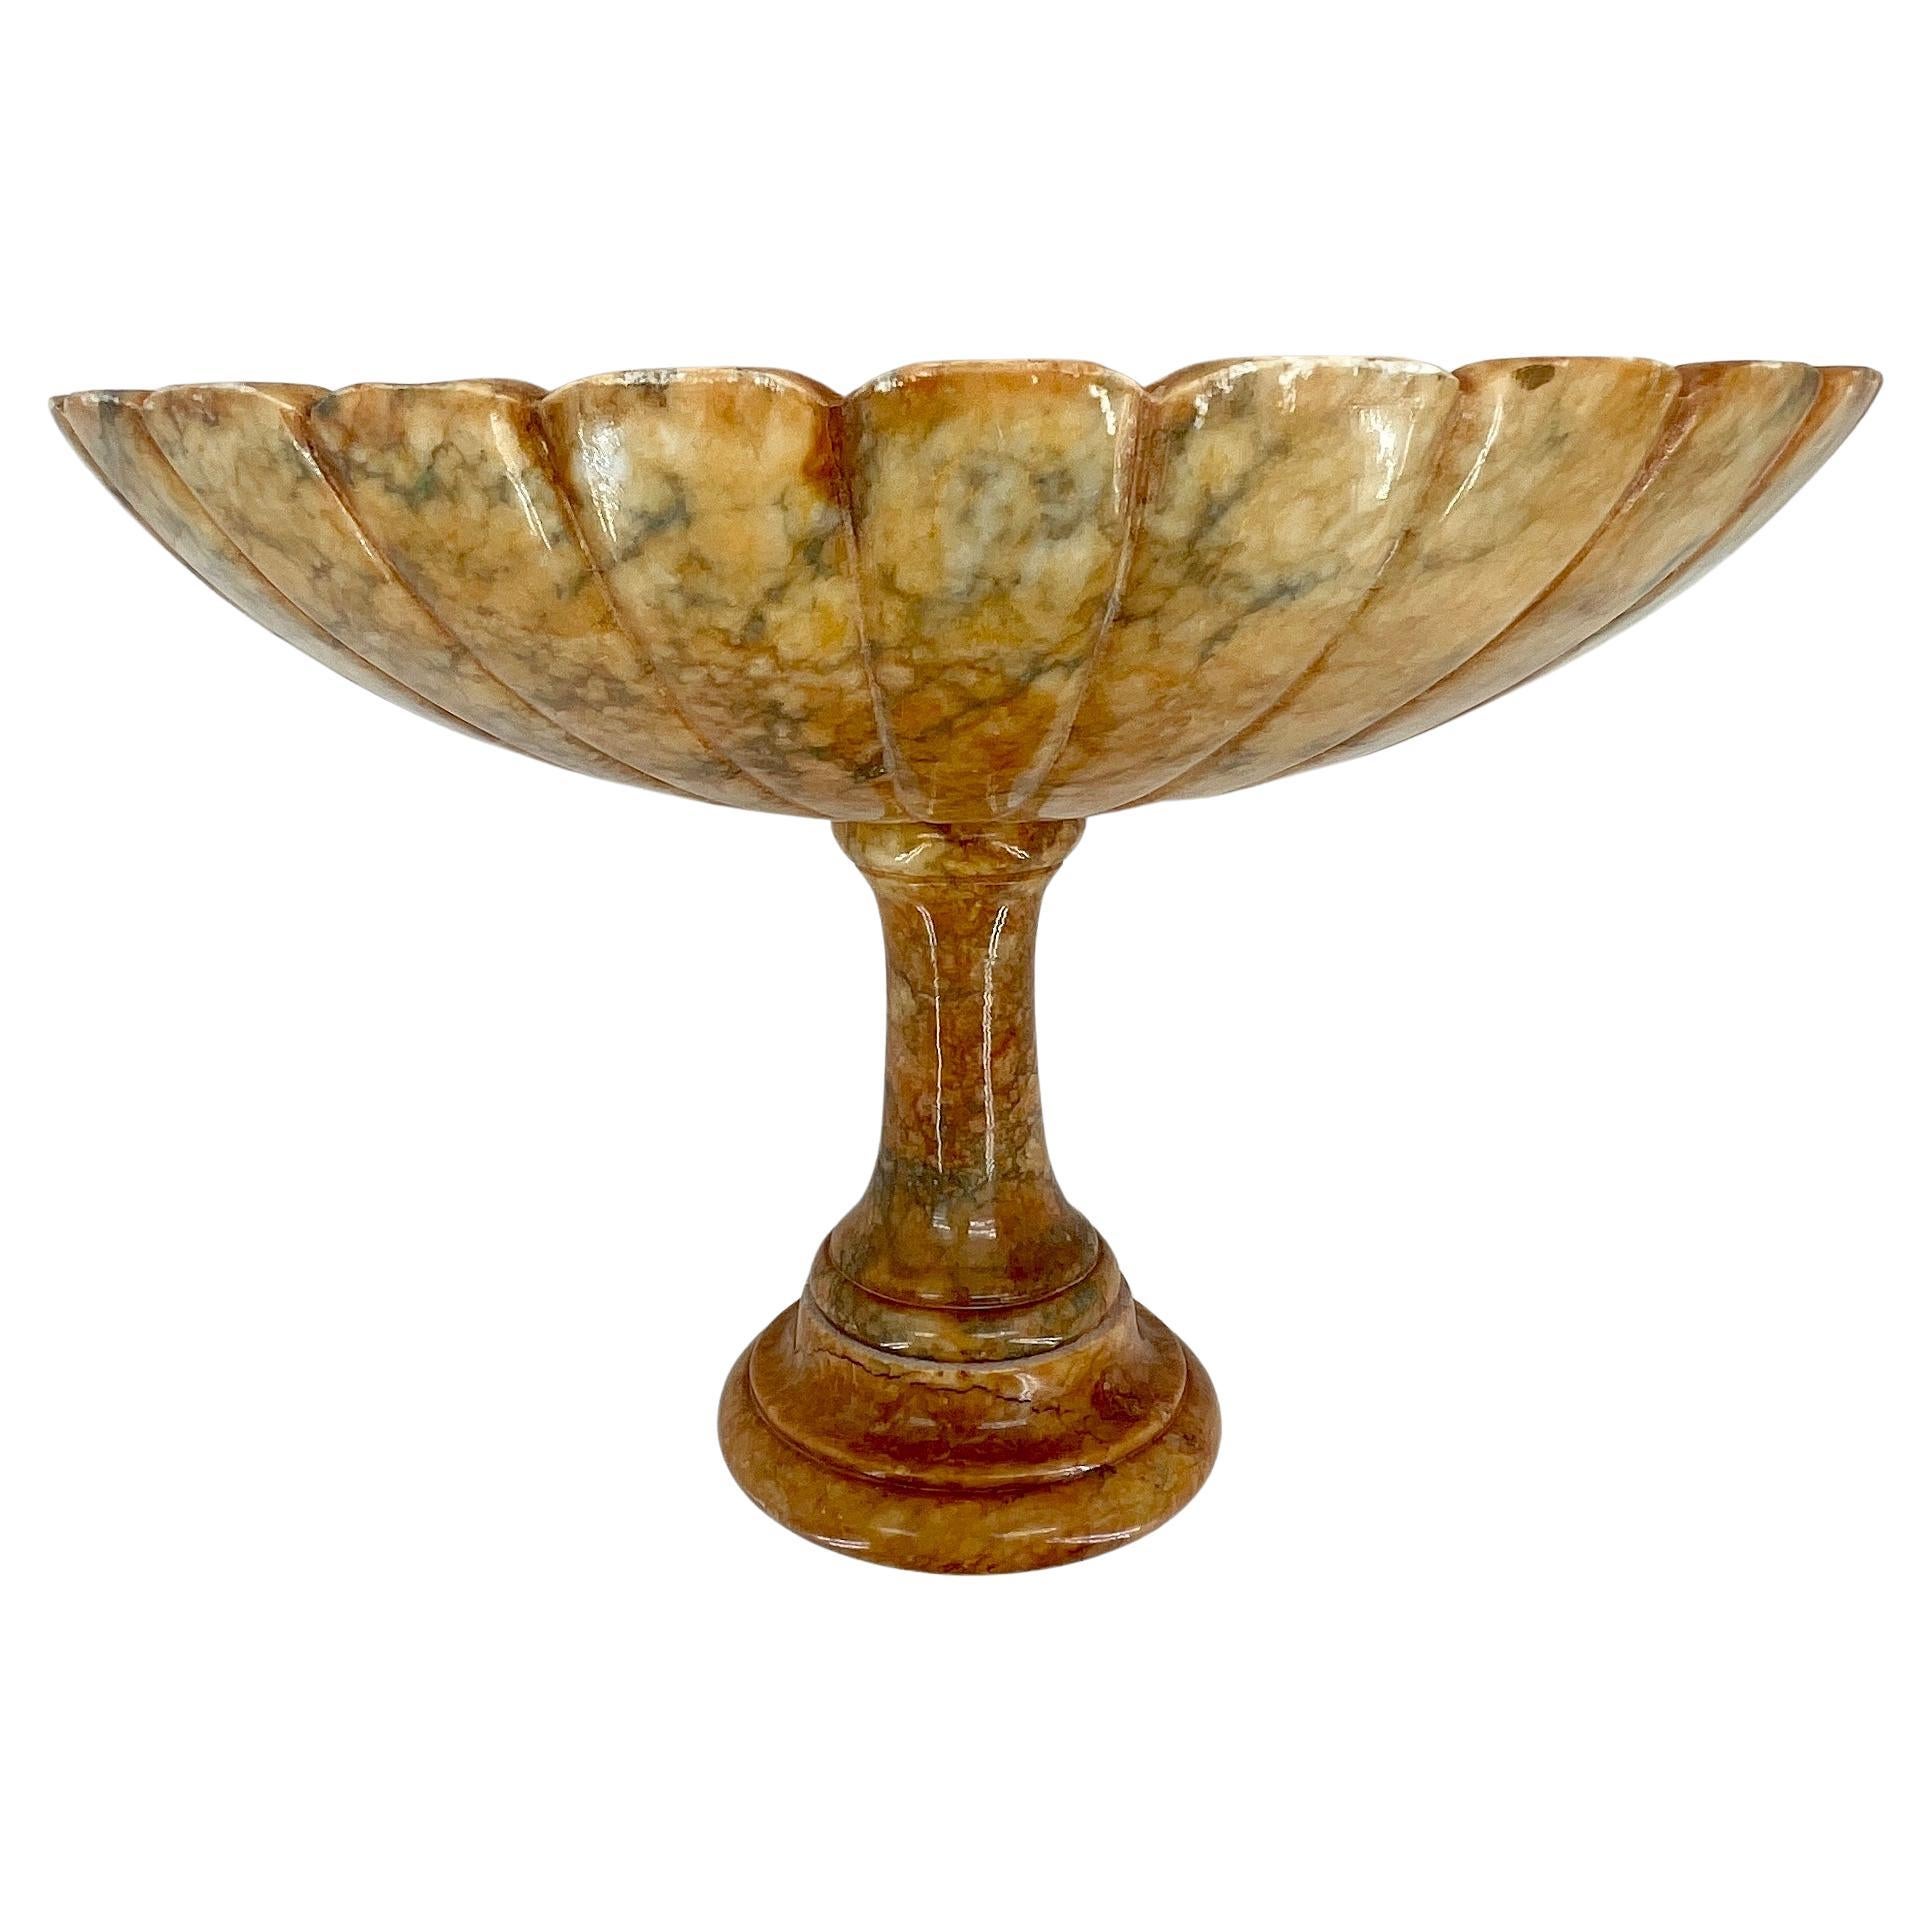 20th Century Mid-Century Italian Red Marble Centerpiece Fruit Bowl Stand For Sale